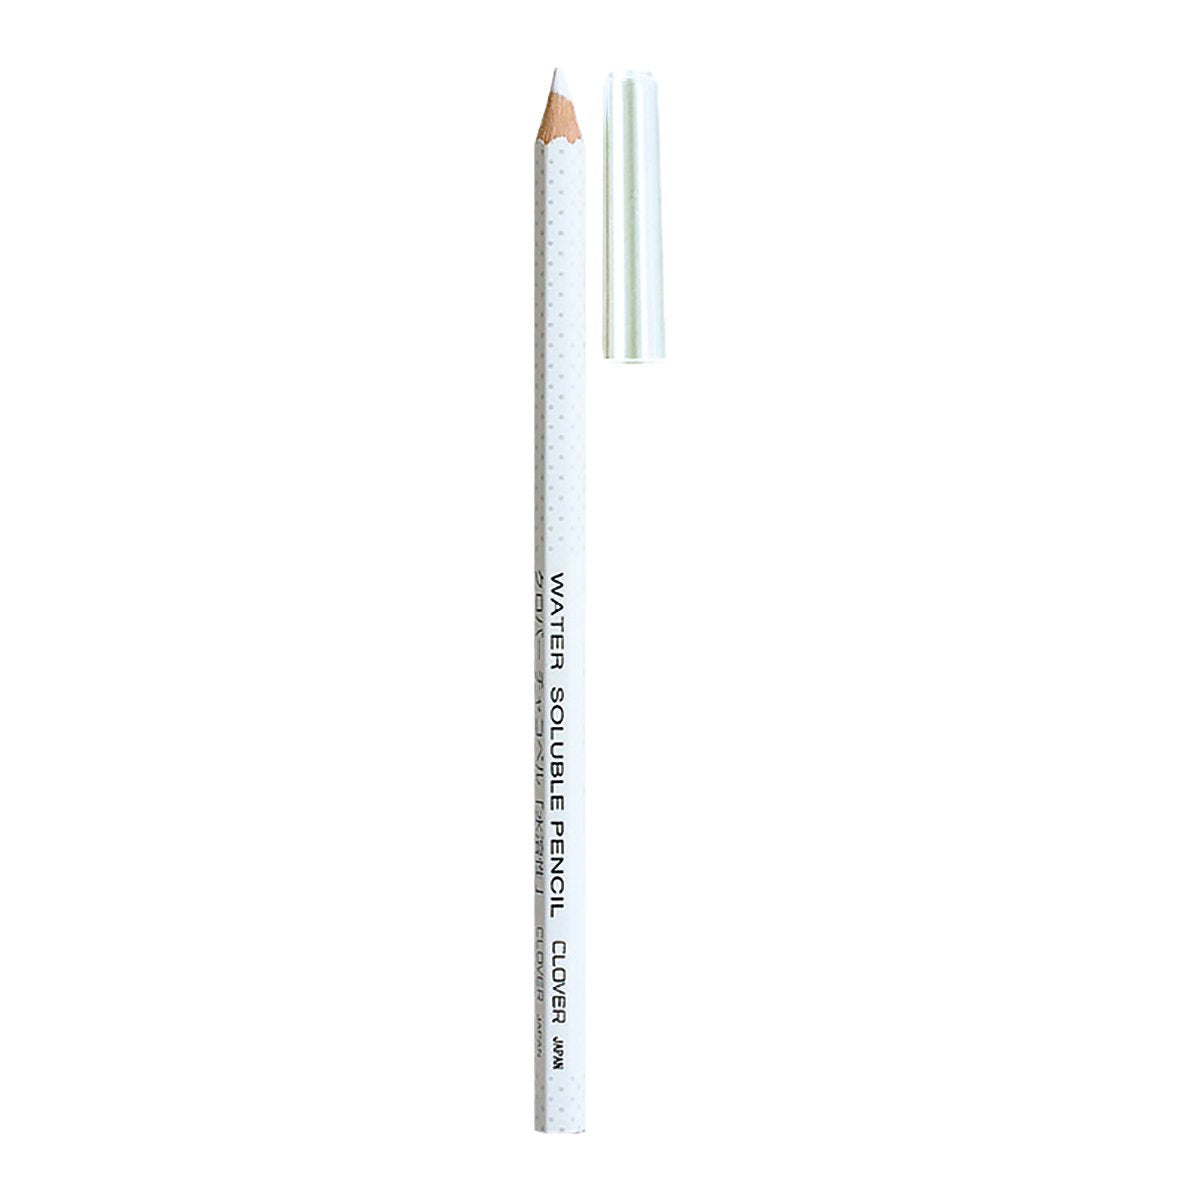 Clover Water Soluble Pencils - 3/Pack - Assorted Colors